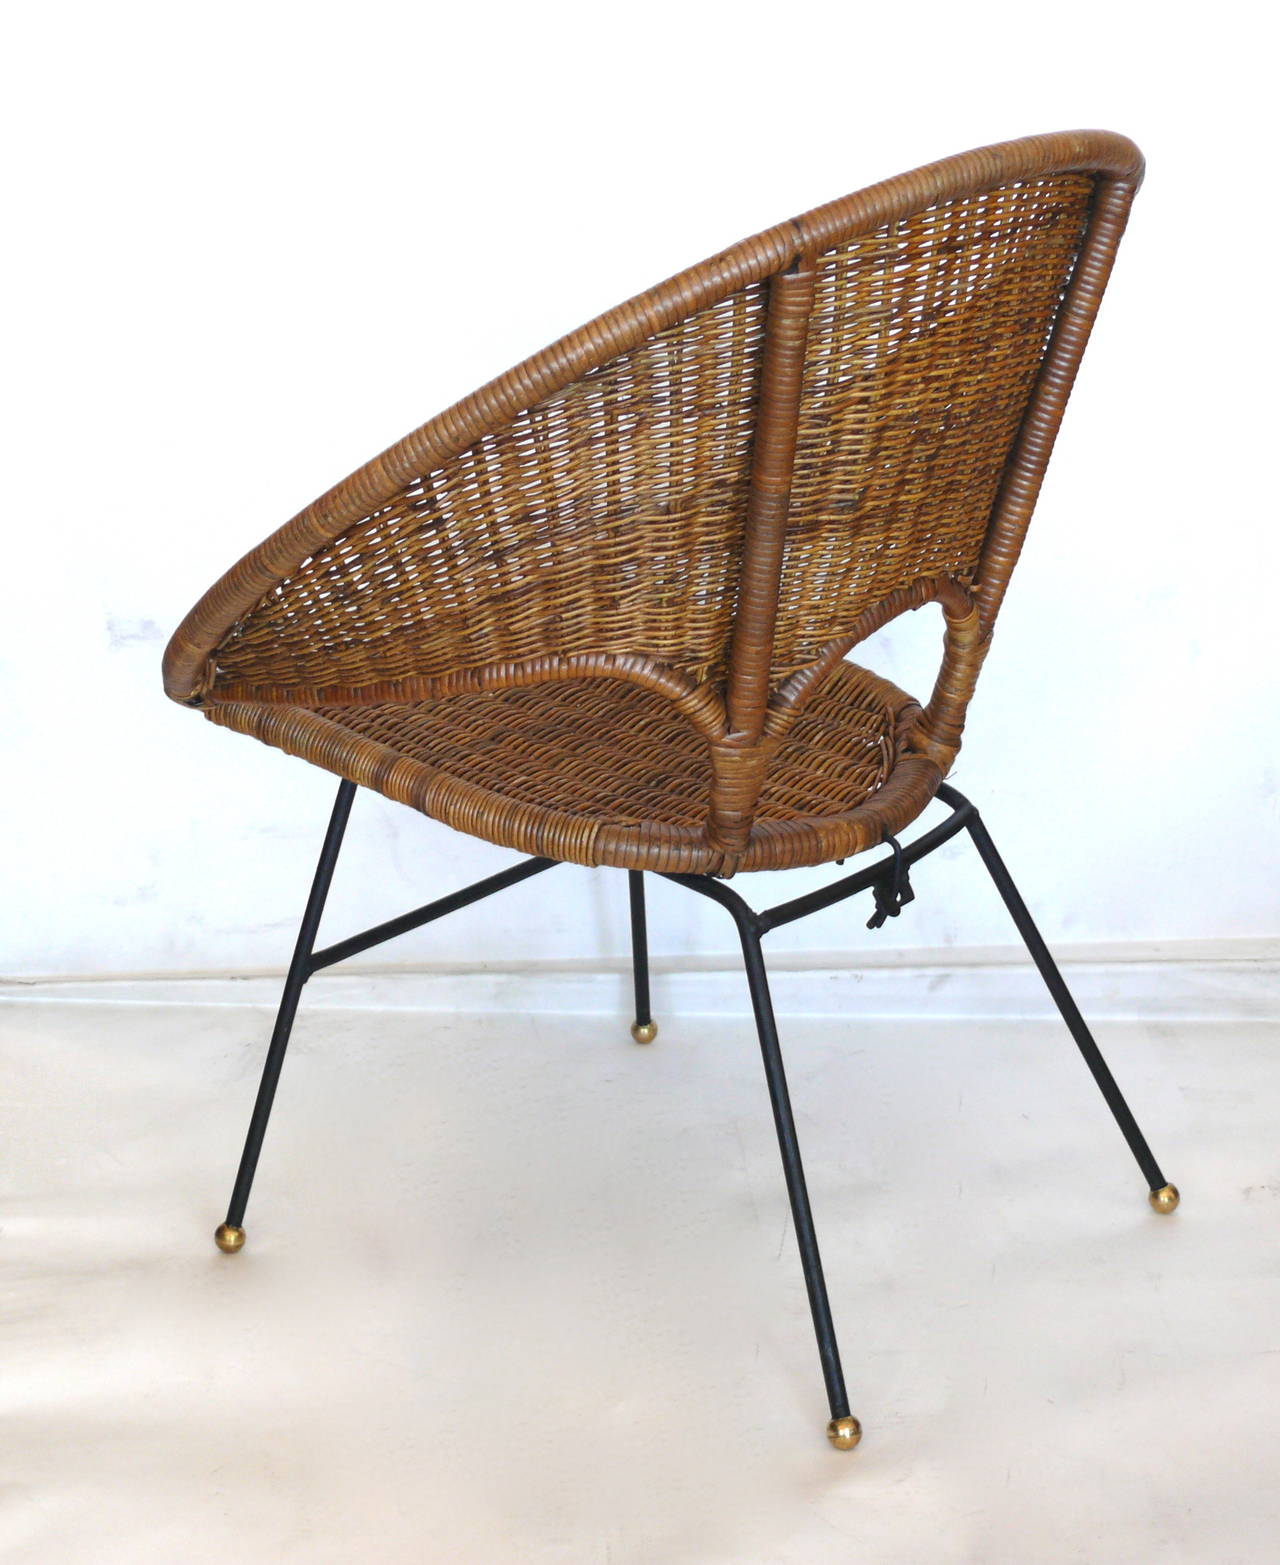 Sculptural Wicker and Rattan Chairs 2